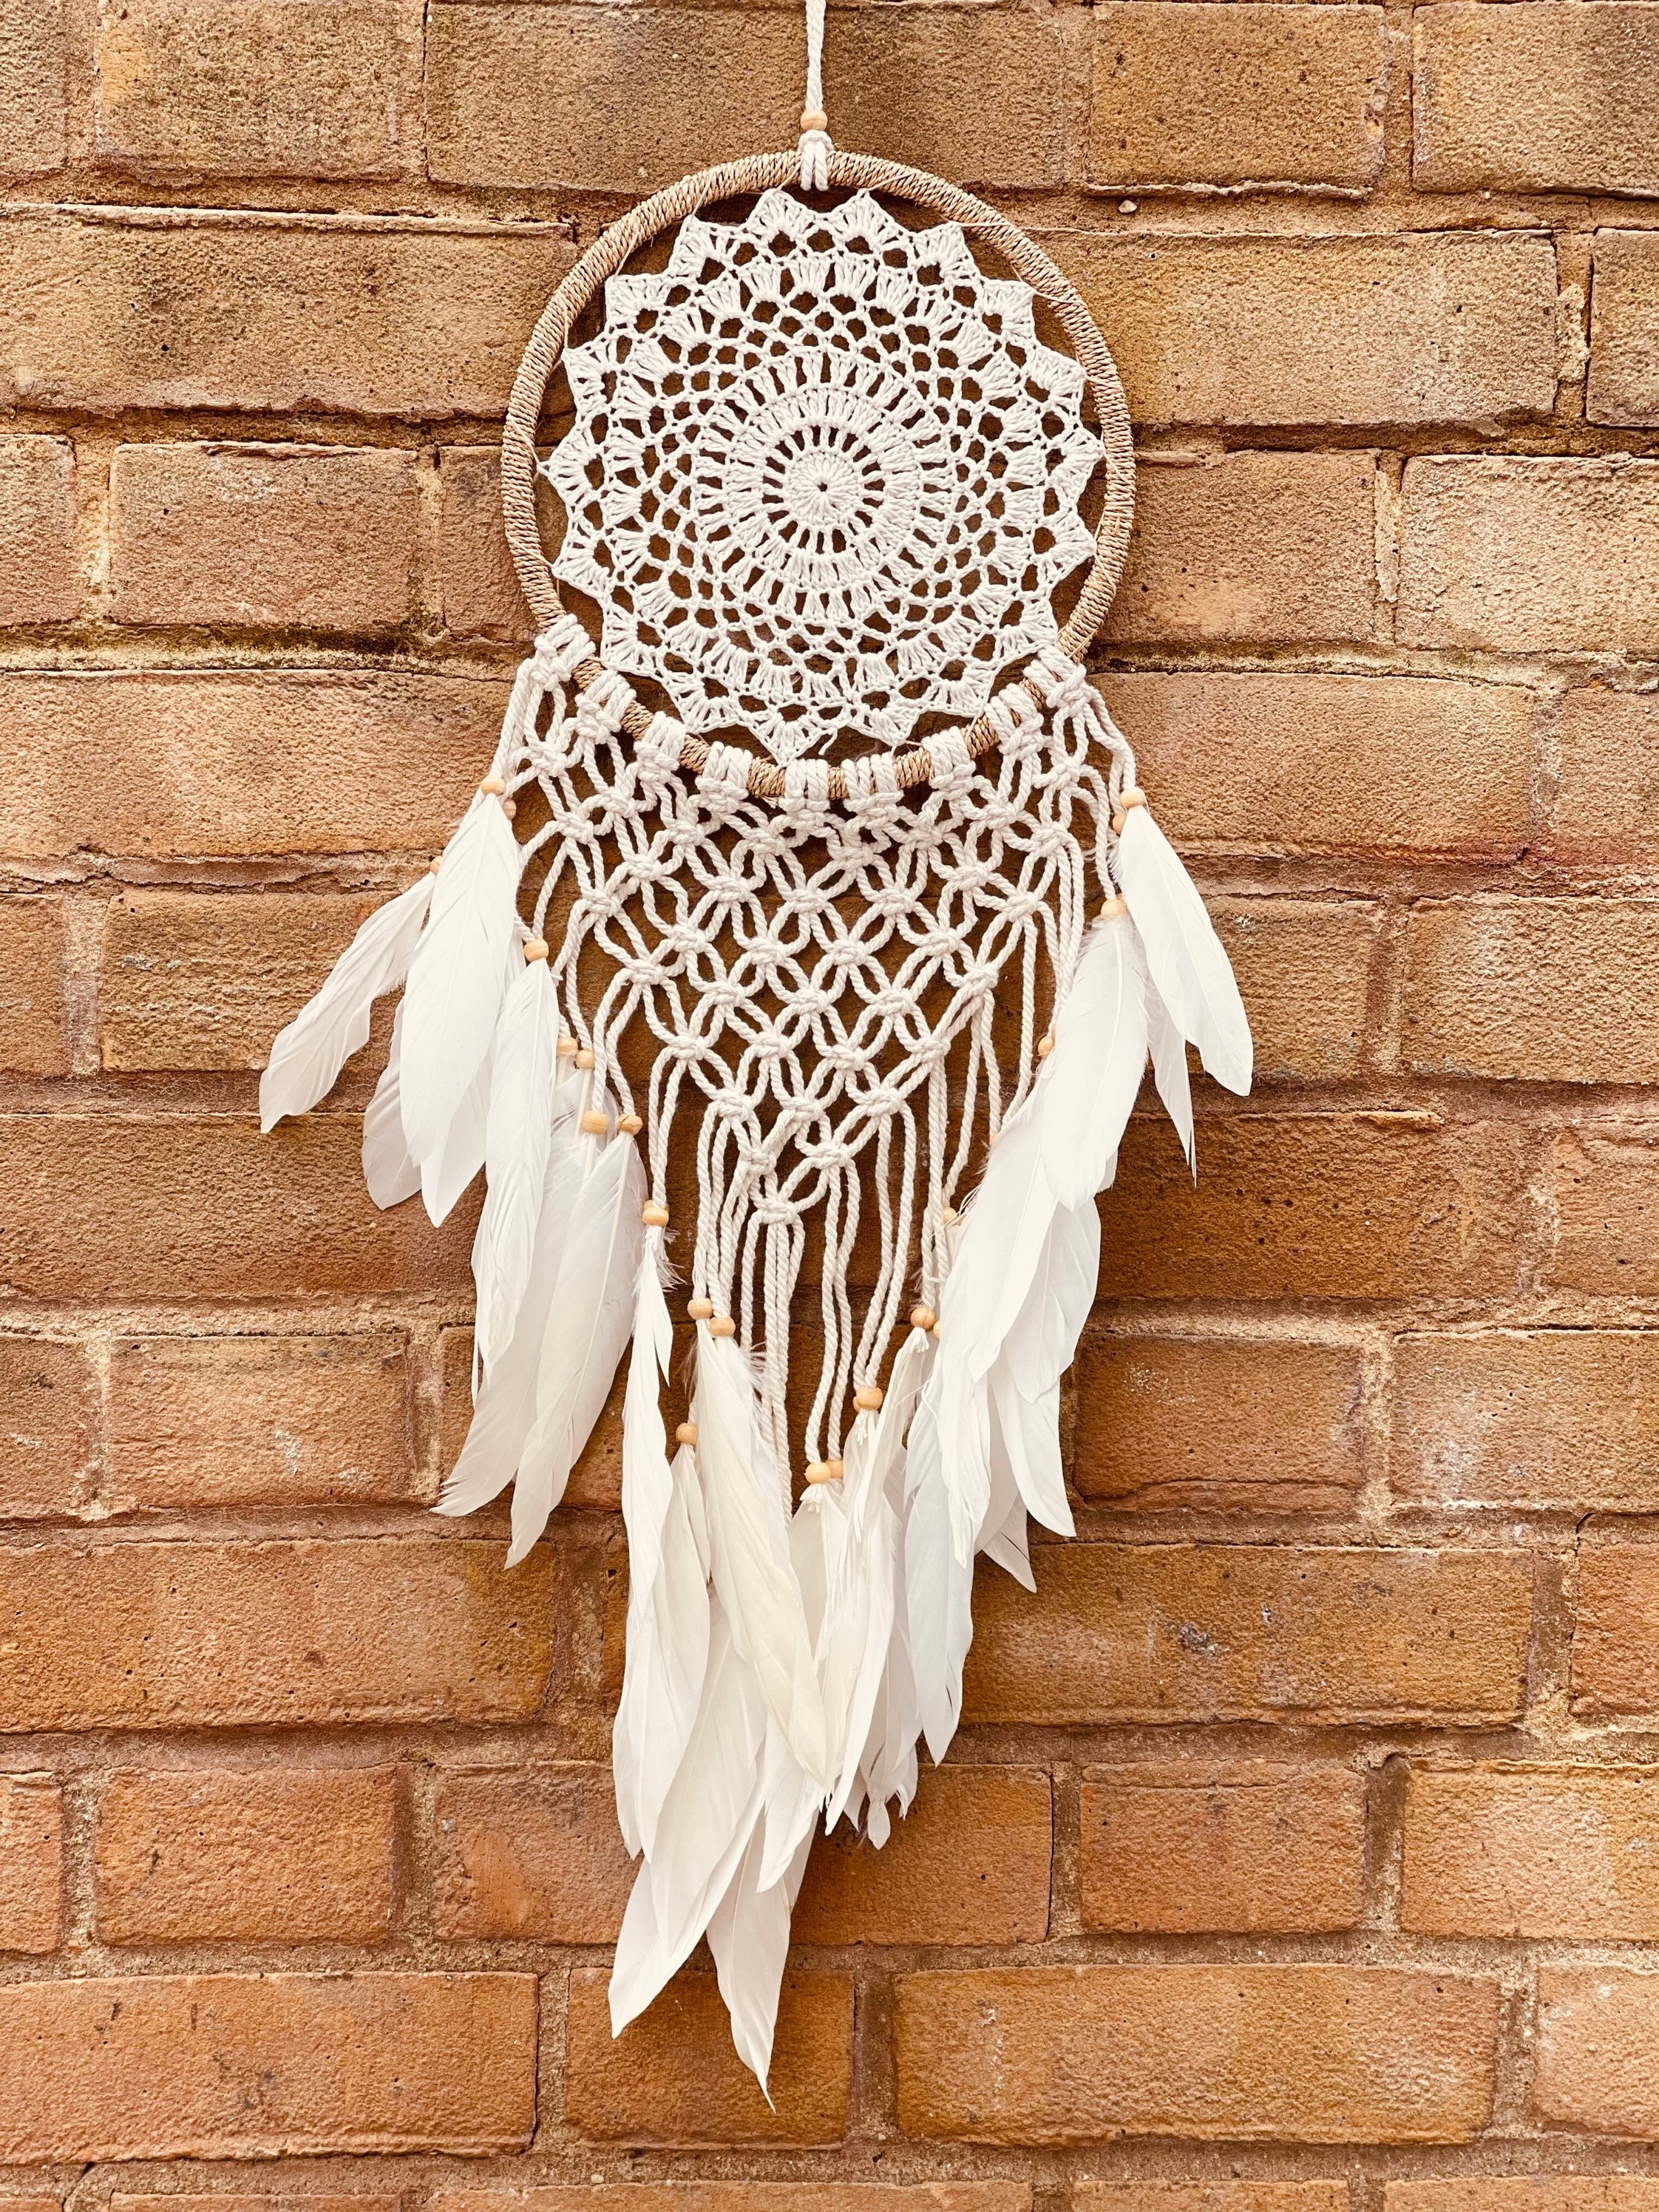 New] The 10 All-Time Best Home Decor (Right Now) - Apartment by Elisa Arp -  Macrame feather dream catcher with gr…